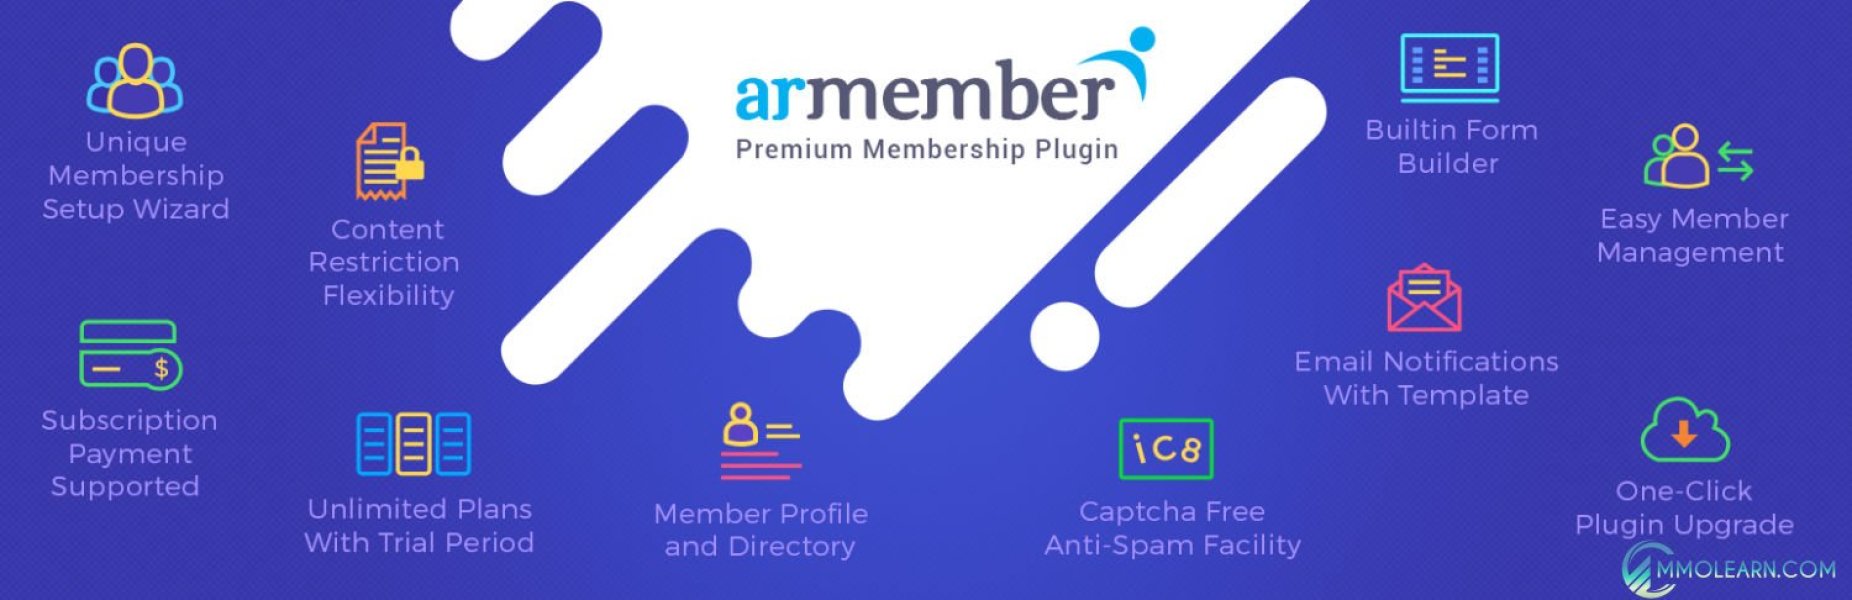 Pagseguro Payment Gateway Addon For ARMember